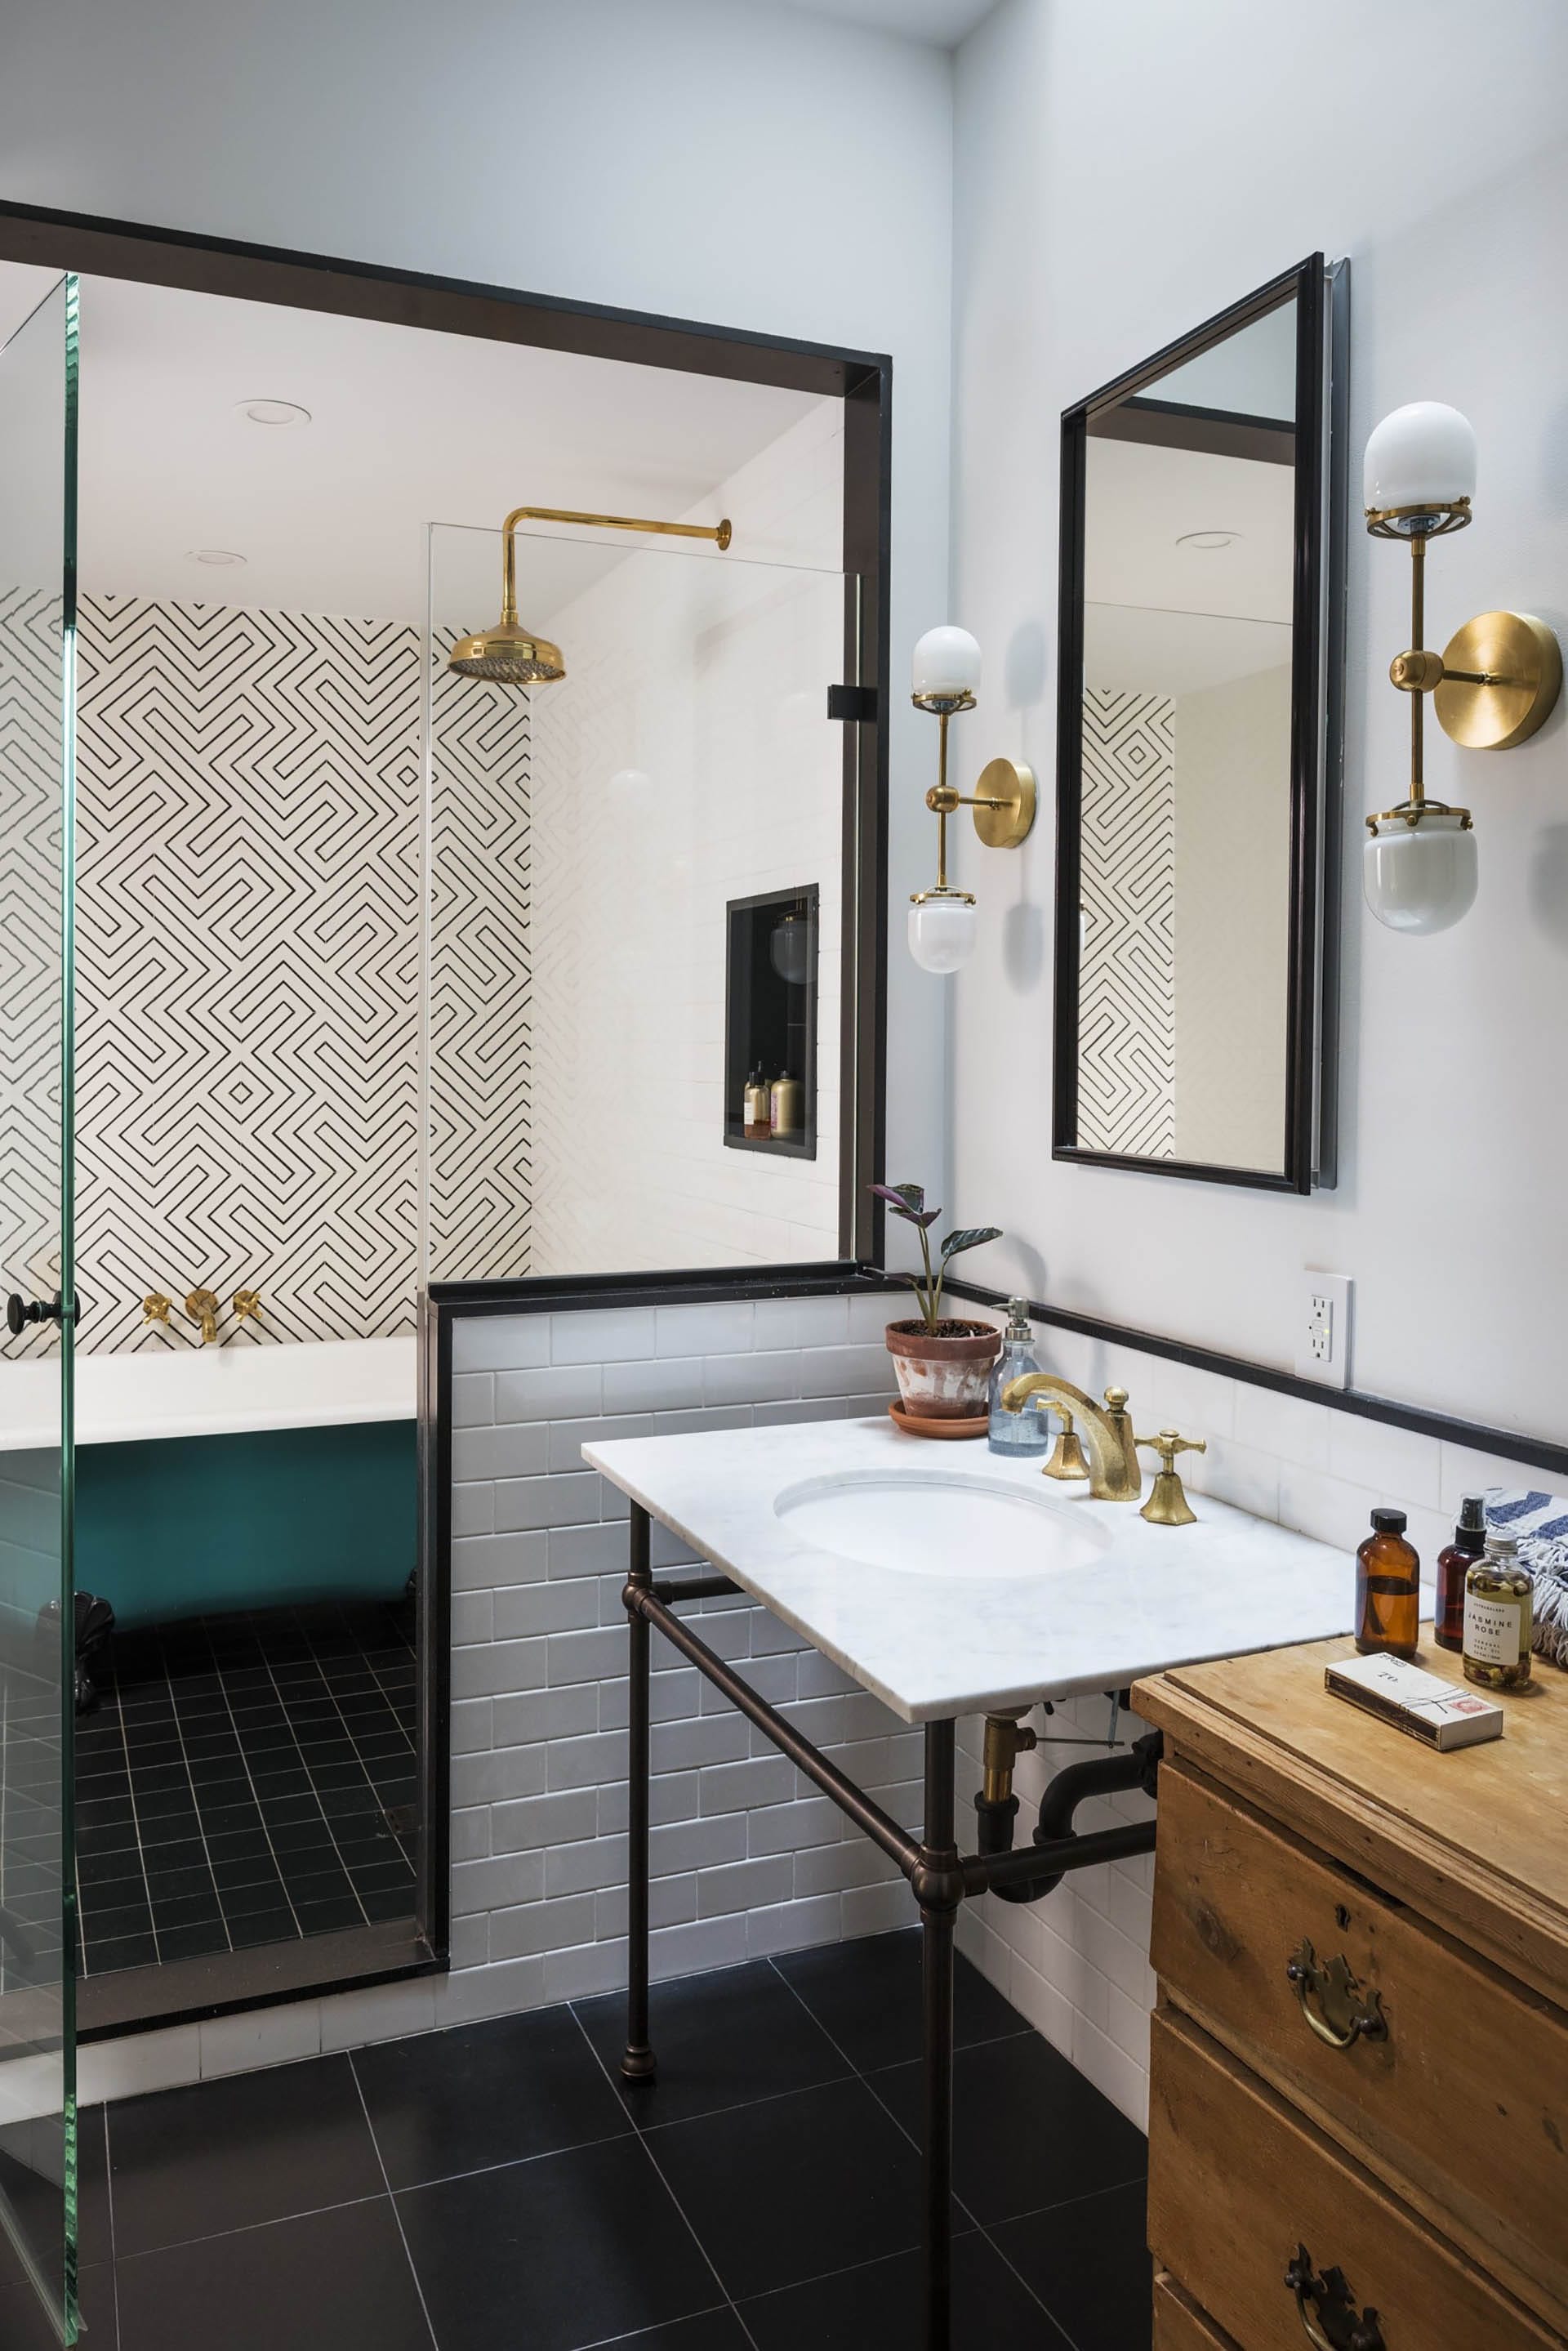 Bathroom with bronze fixtures, a teal freestanding tub and shower stall, and geometric wallpaper.